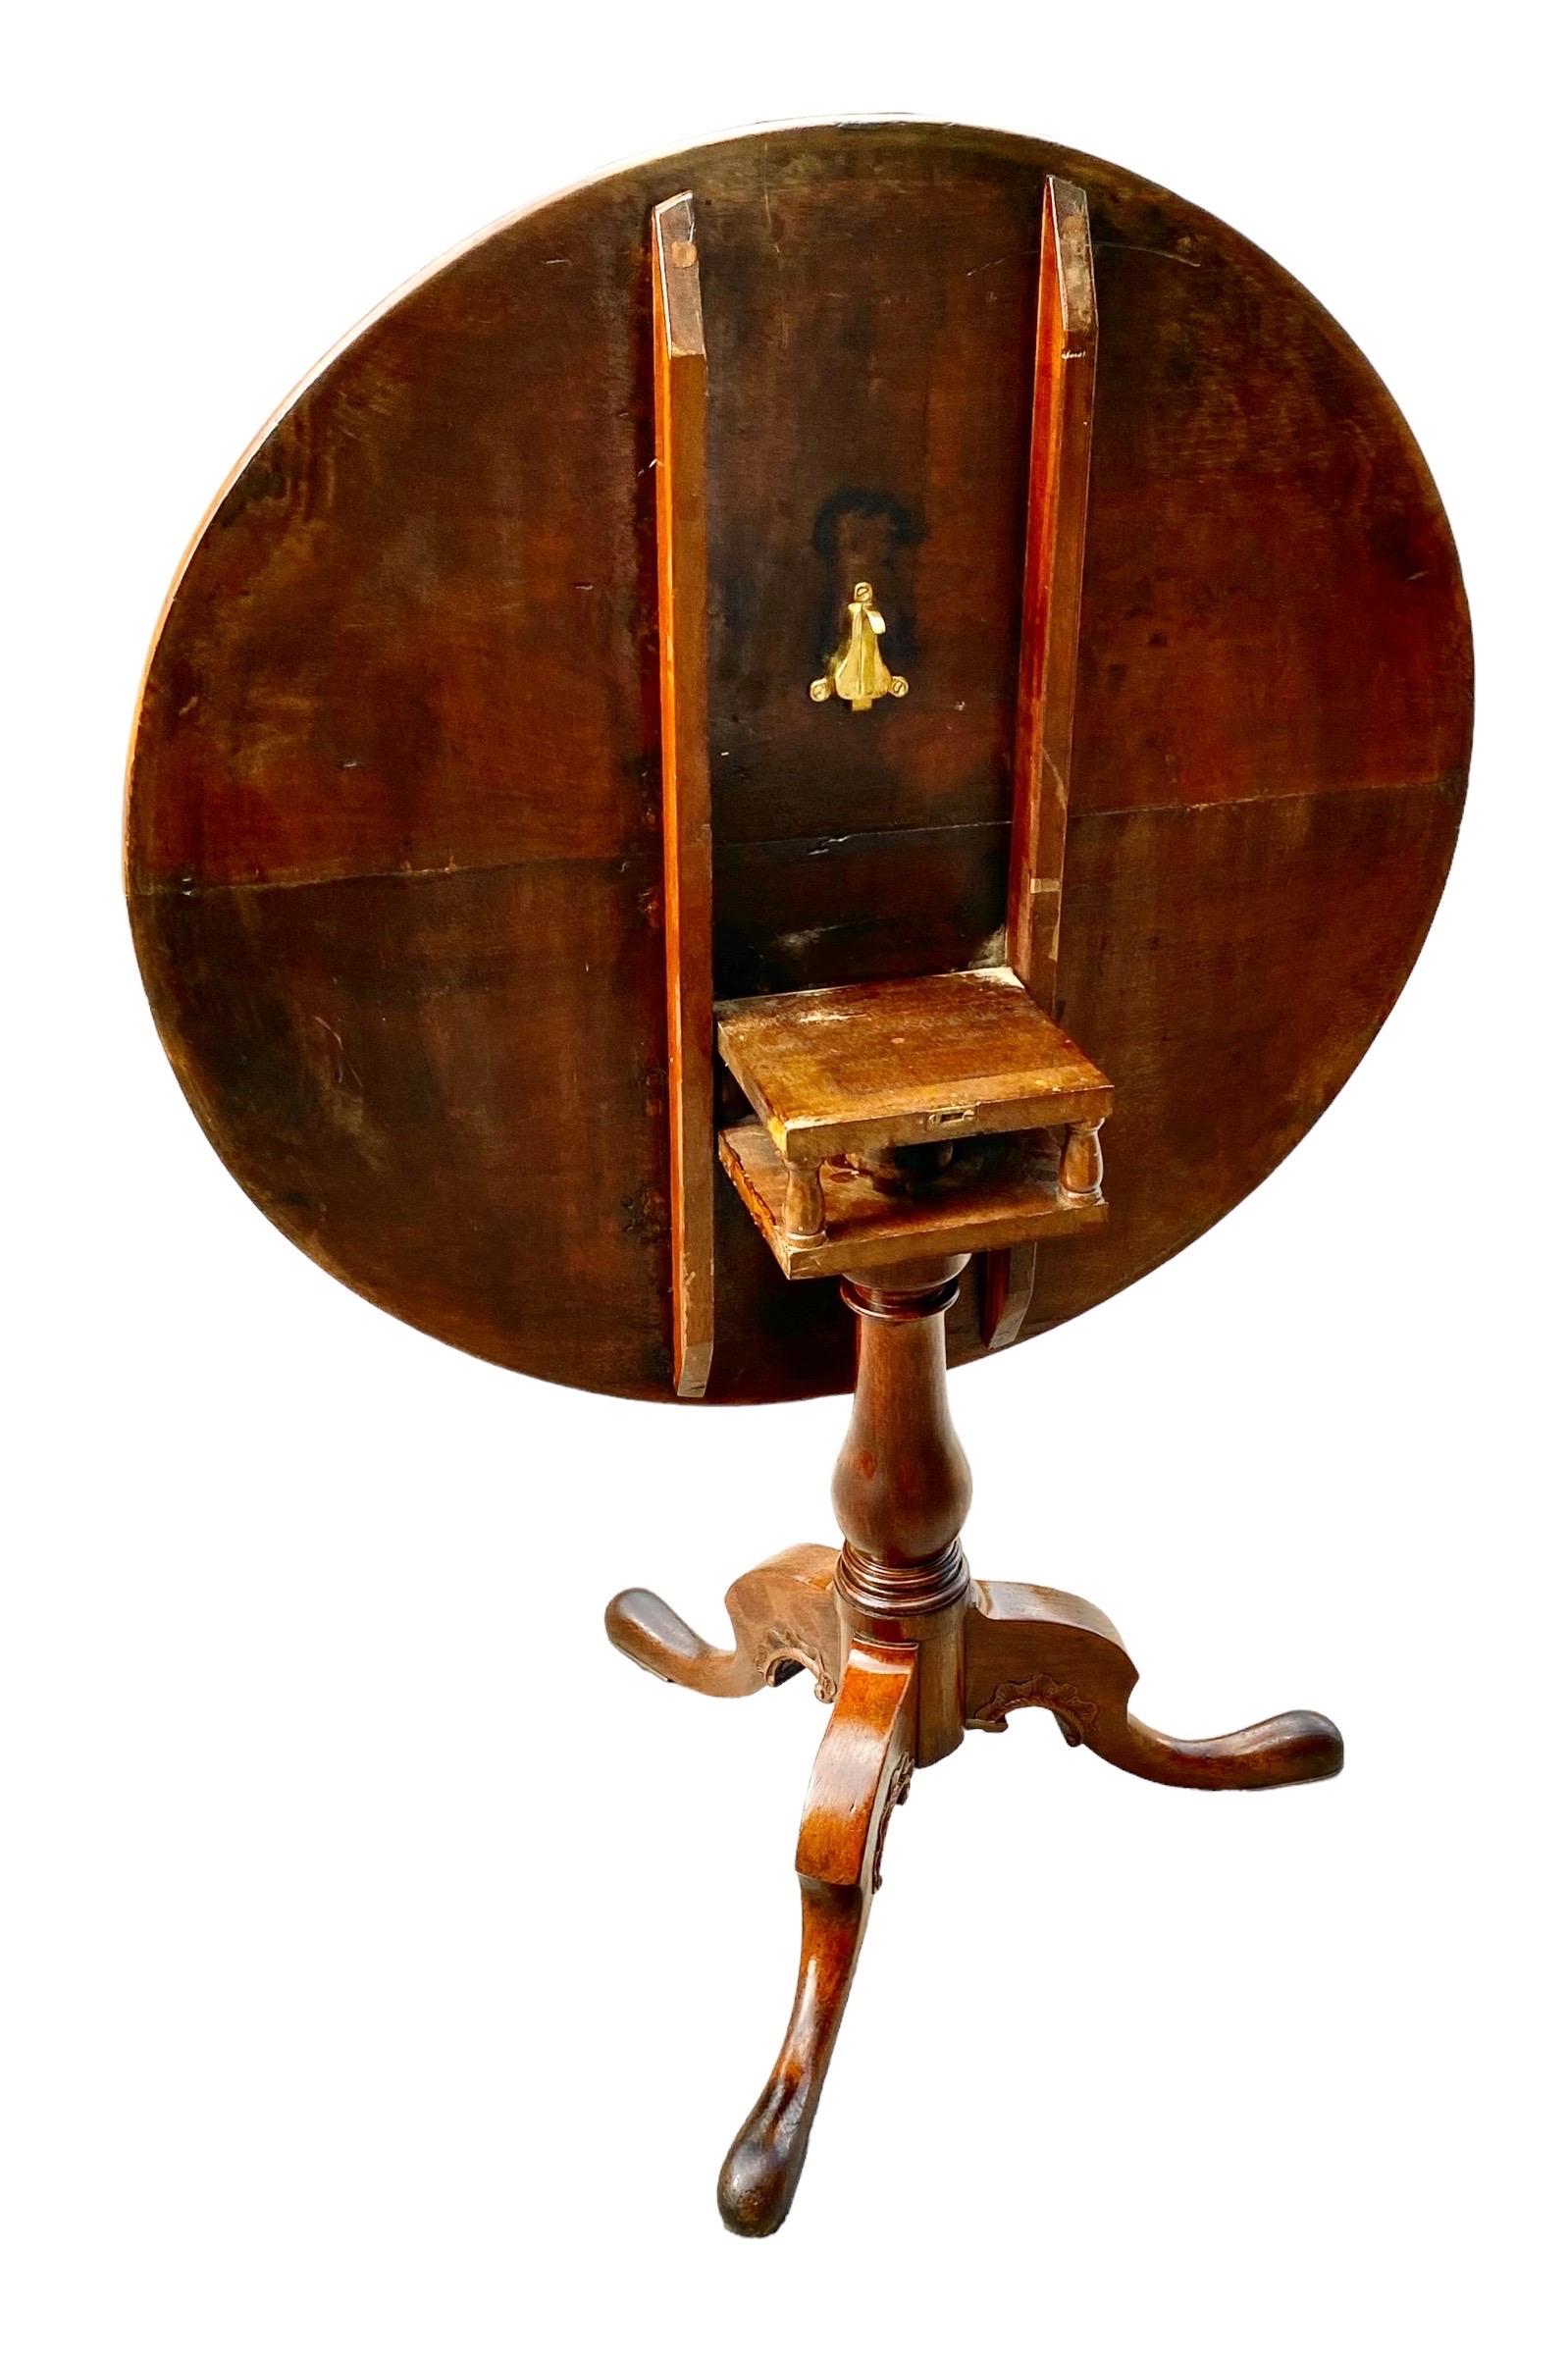 A lovely antique English Georgian hand carved, faded mahogany tilt top, revolving table with a carved tripodal base with pad feet. The top is the most exquisite old, two-board solid faded mahogany making a beautiful presentation. These were used as